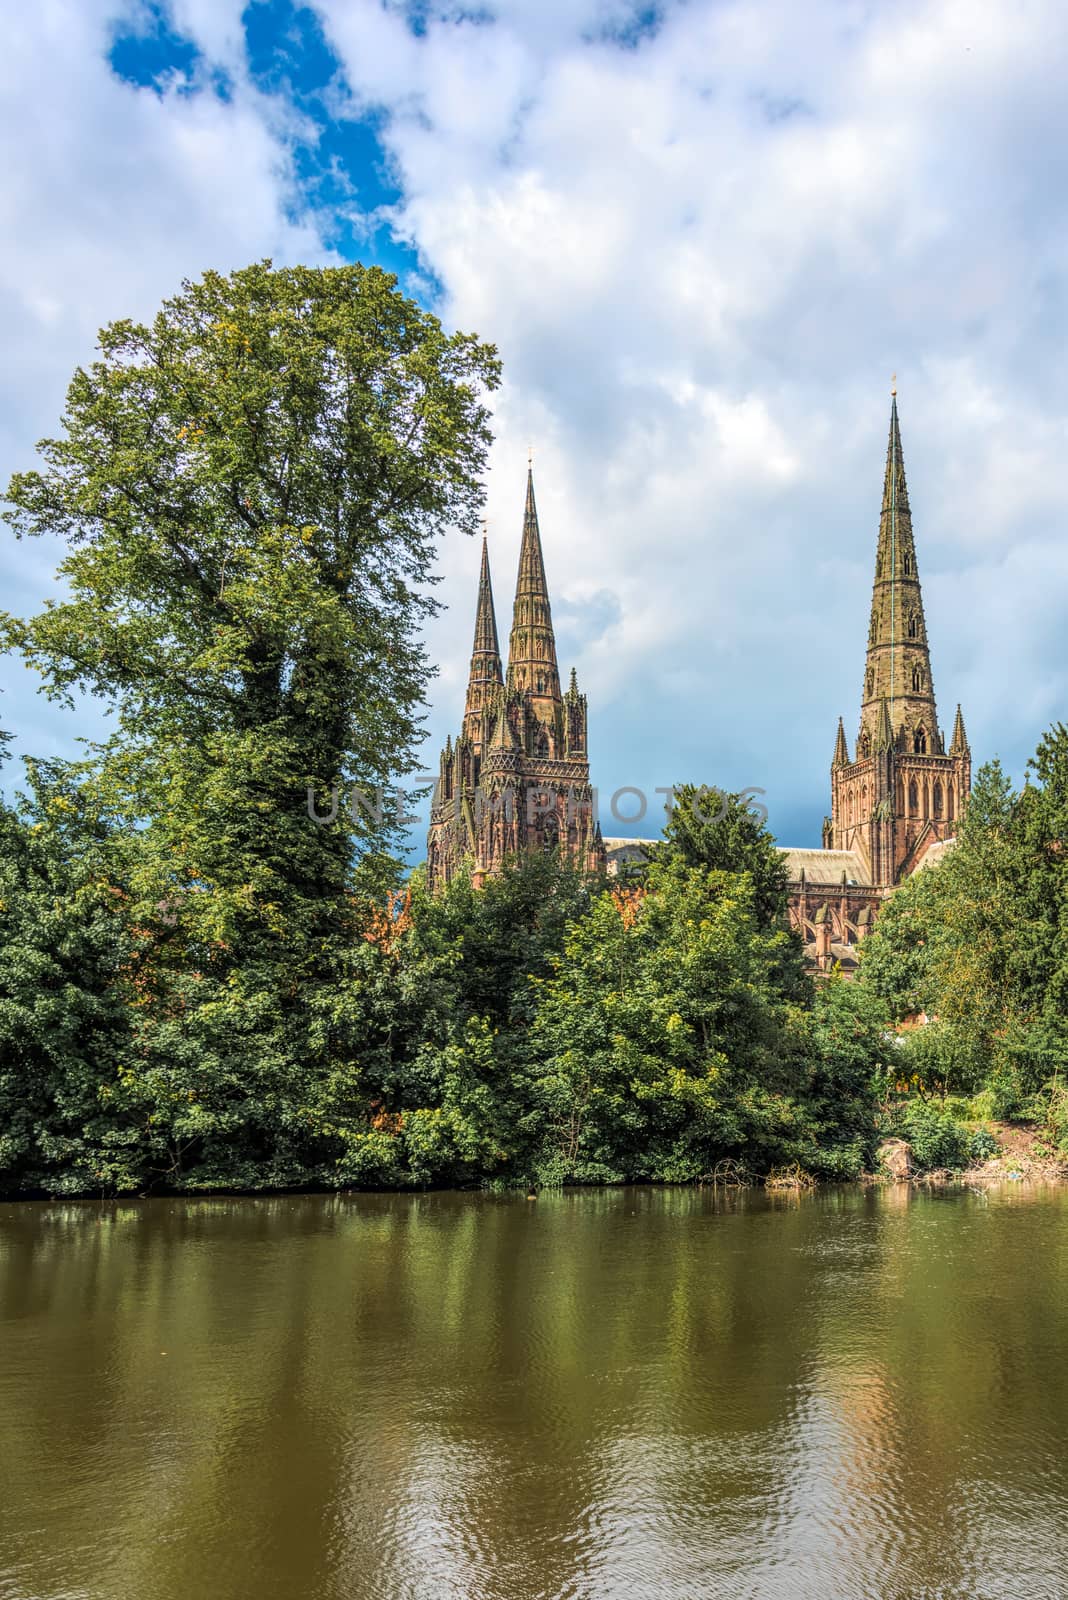 Lichfield cathedral by alan_tunnicliffe